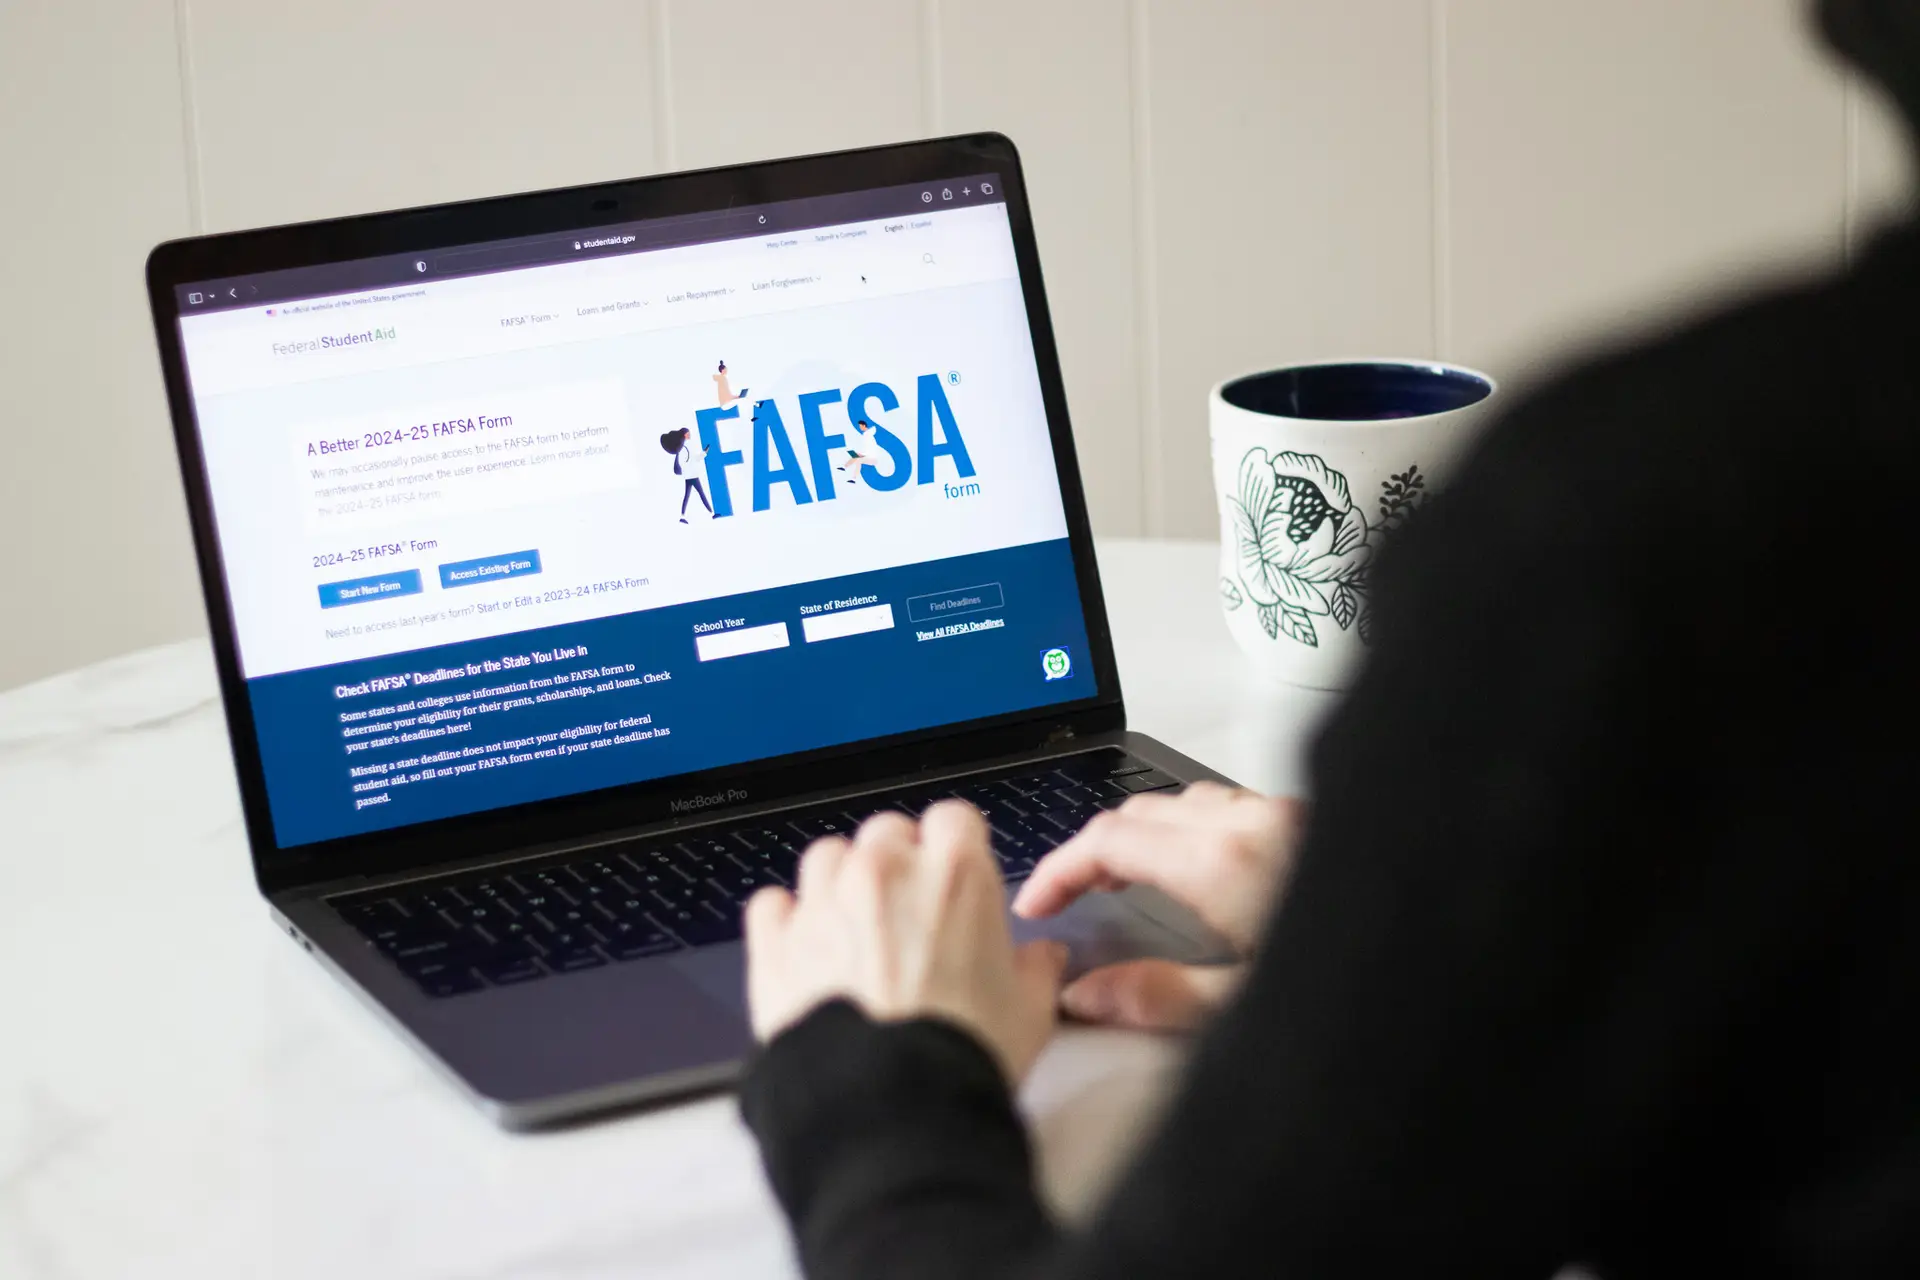 A person is displayed in front of a computer screen with the Better FAFSA page on the screen.